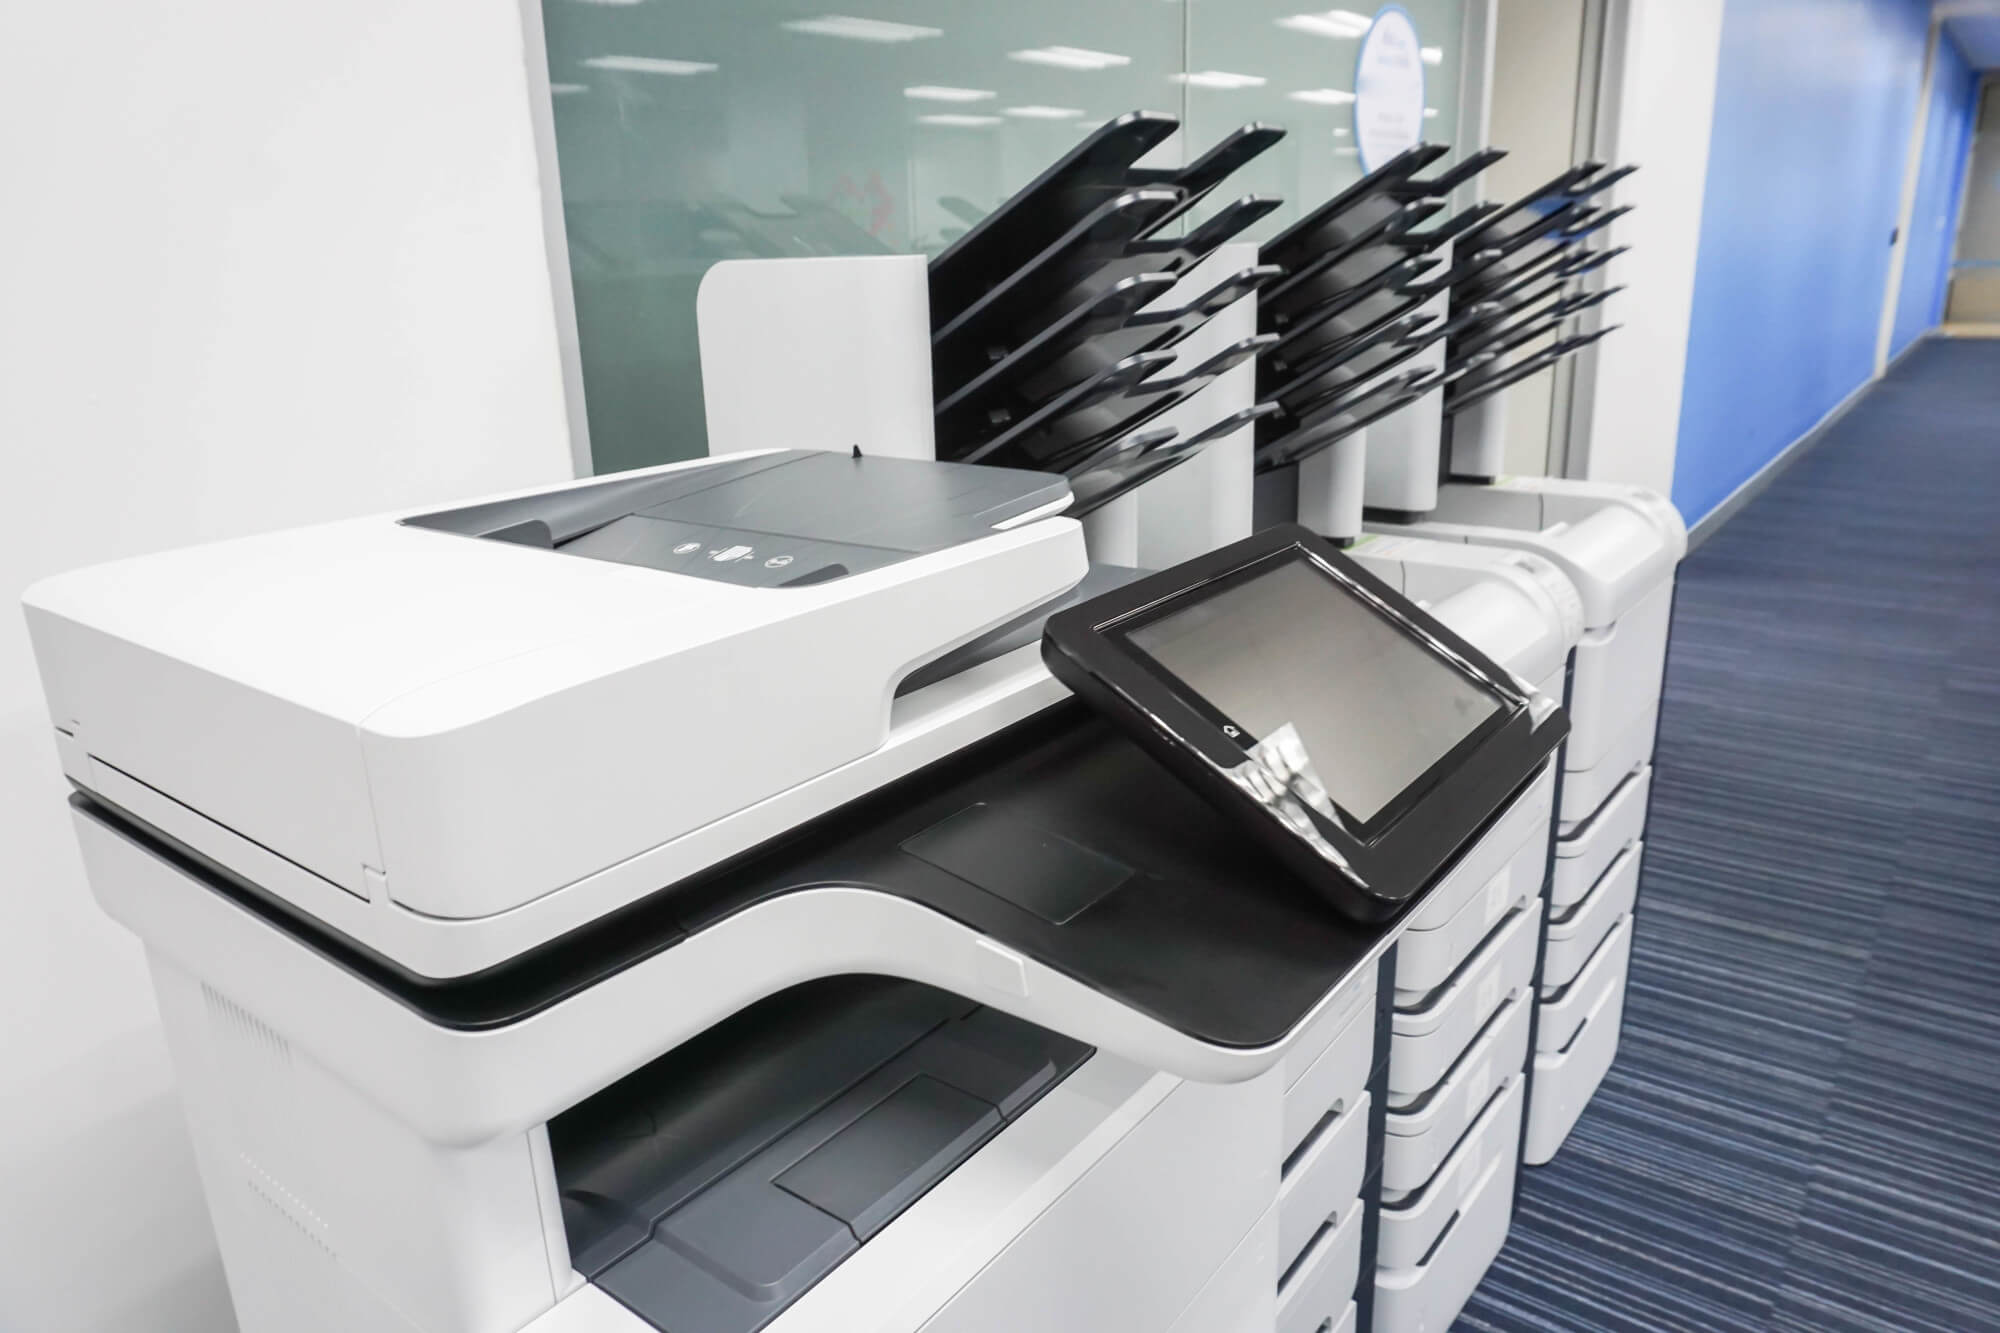 Lease a Printer for Office